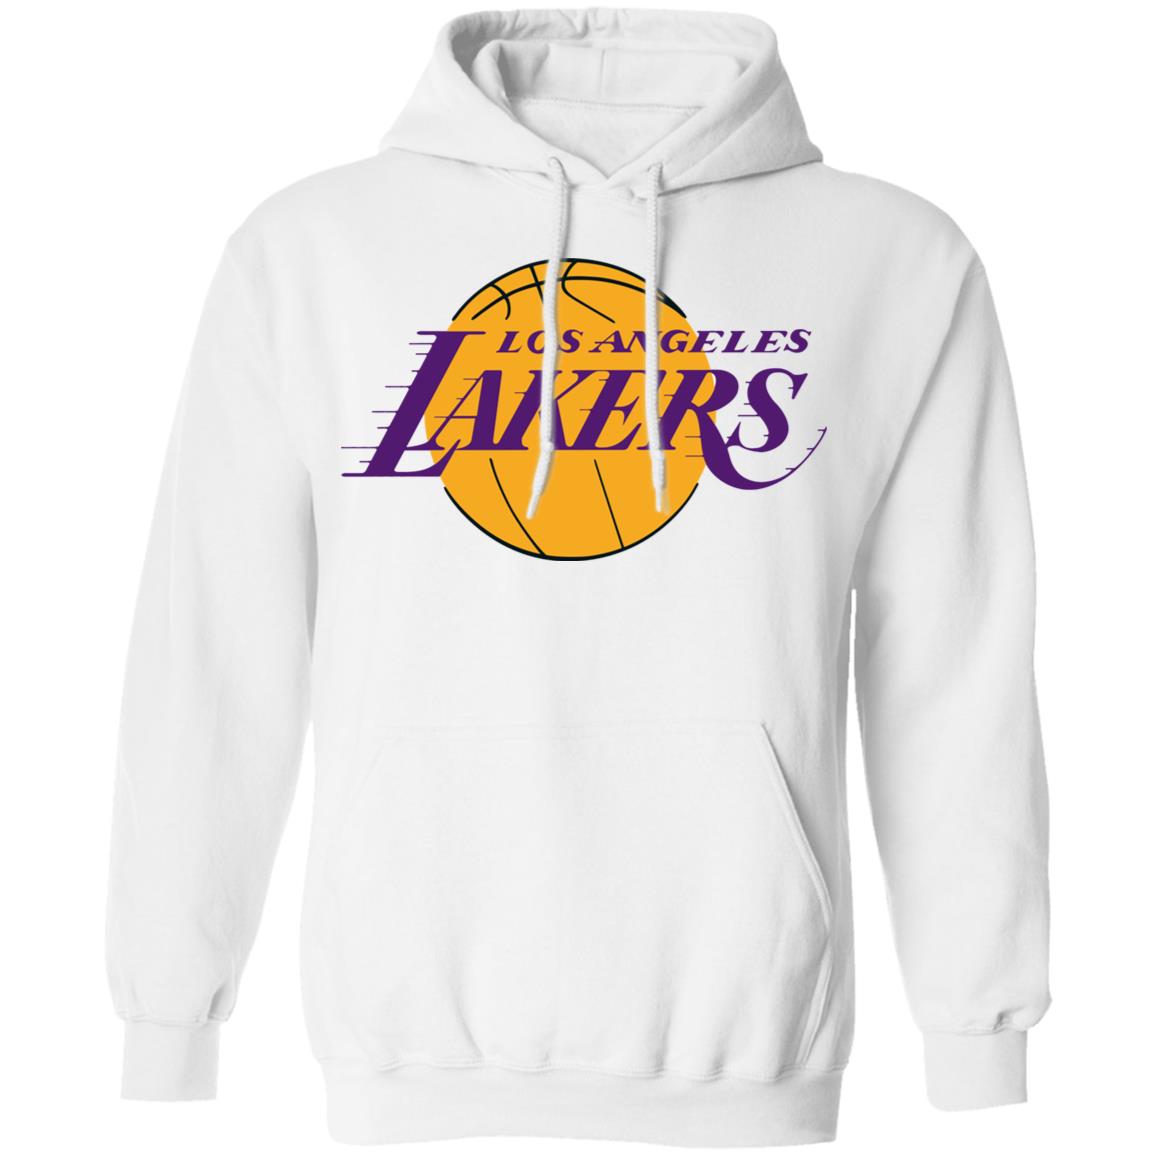 Los angeles lakers hoodie white
#LALakersHoodie #WhiteHoodie #NBAFashion #BasketballApparel #LakersNation #USFashionTrends #LosAngelesStyle #StreetwearUSA #FanGear #NBAFans #LALakersMerch #AmericanStreetStyle

tipatee.com/product/los-an…